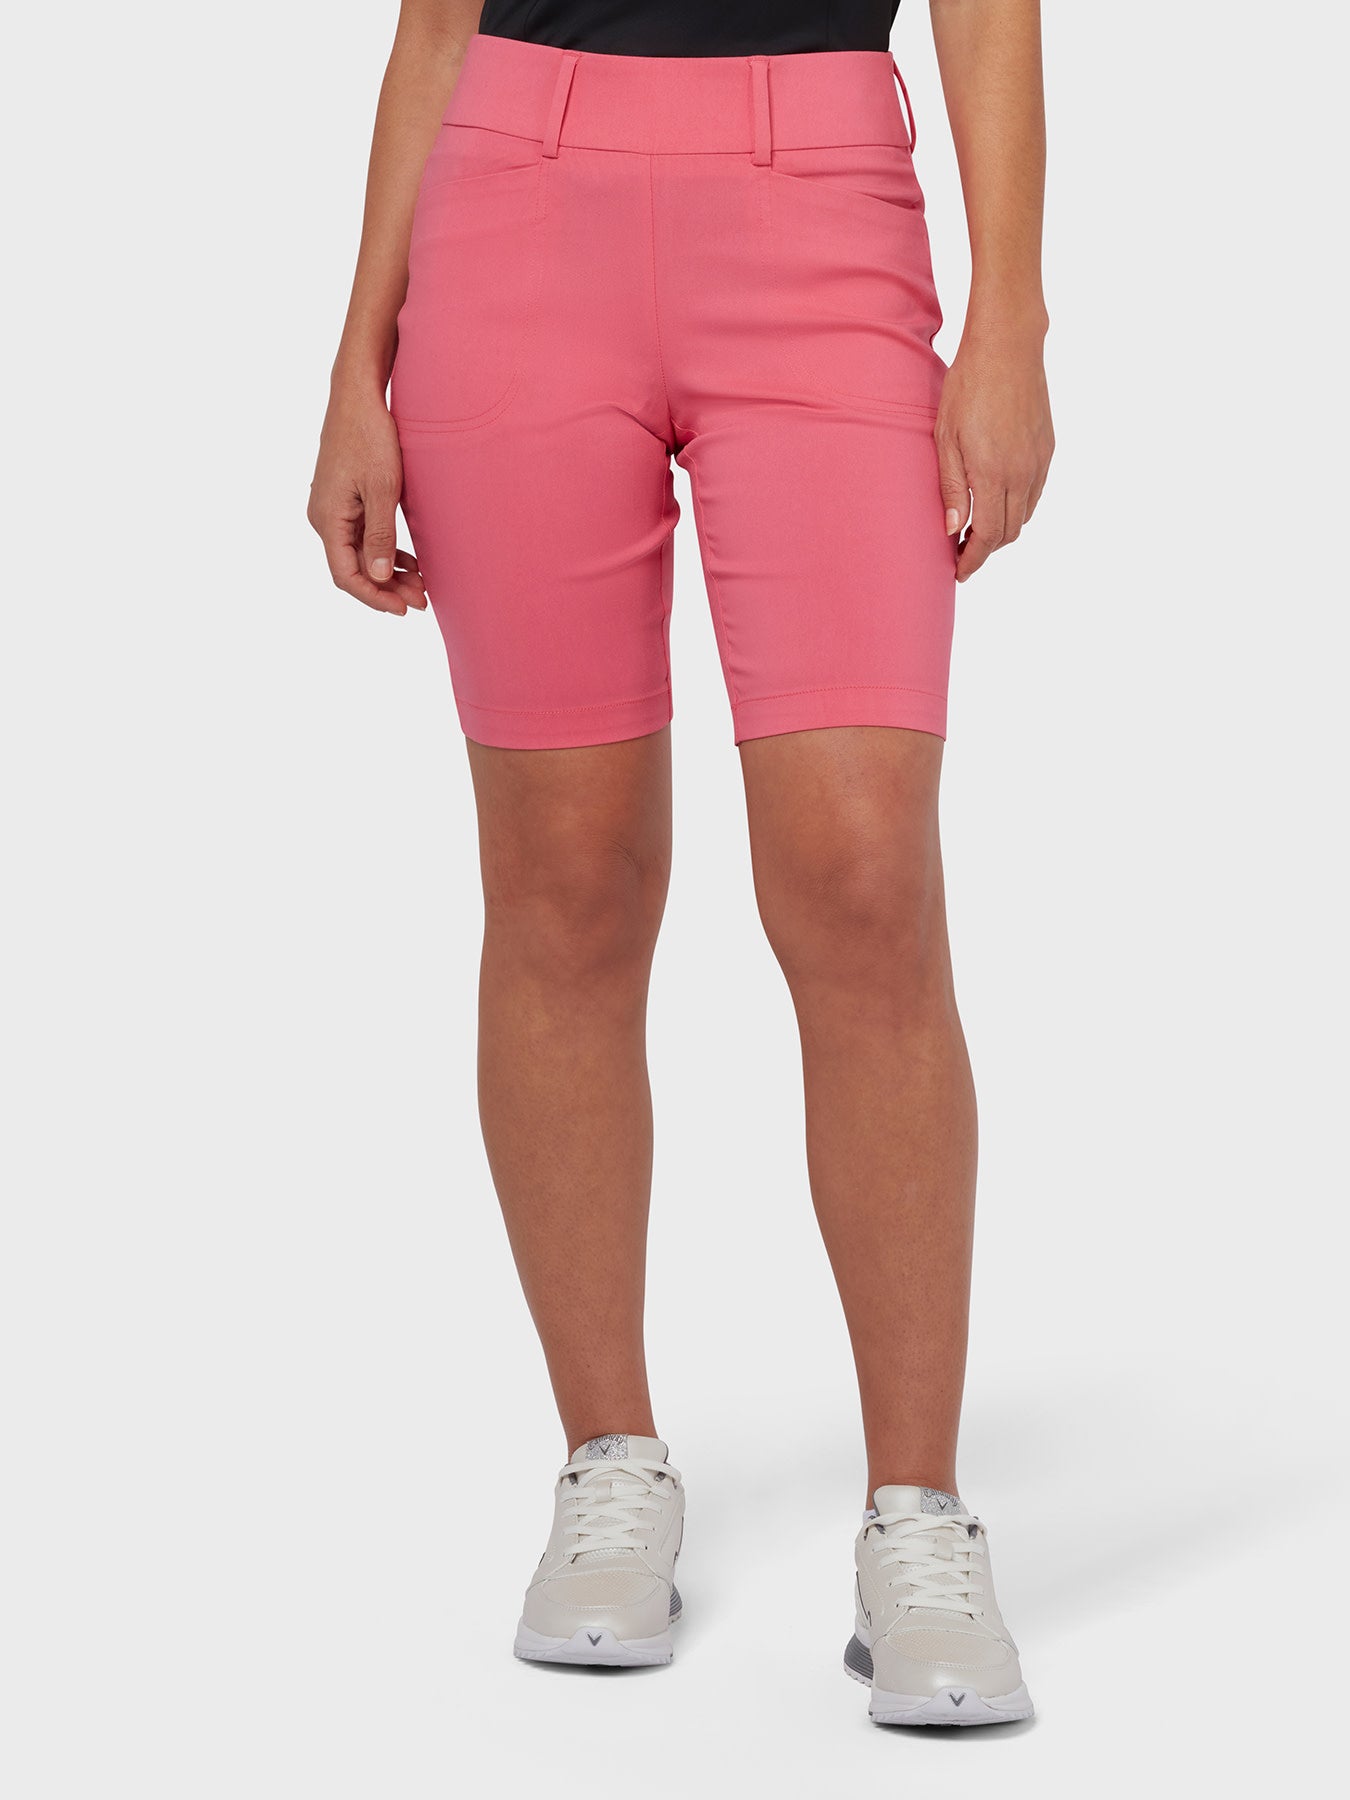 View Truesculpt Stretch Womens Shorts In Fruit Dove information